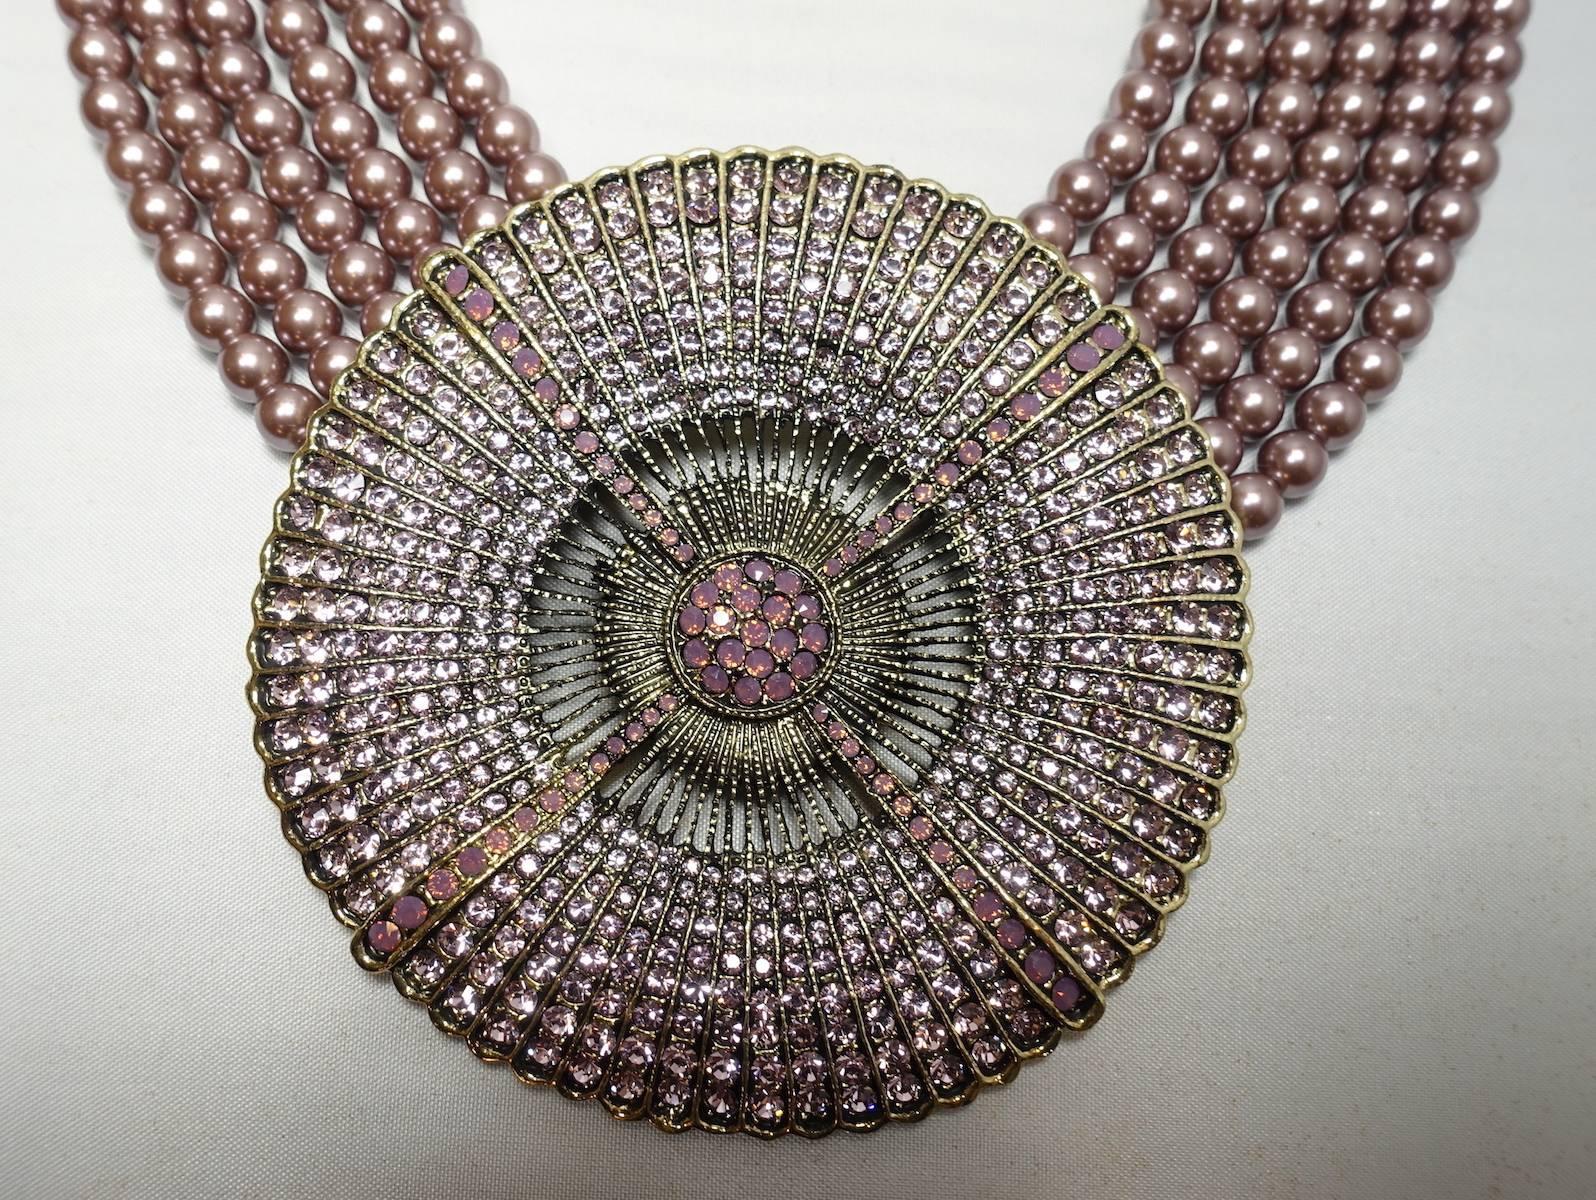 This Heidi Daus Belgium disc drop necklace features 6 rows of mauve color faux pearls. It has a large disc drop that is encrusted with rows of pave set round crystals. It has a scalloped border and is in a bronze tone setting. It measures 16-1/4” X